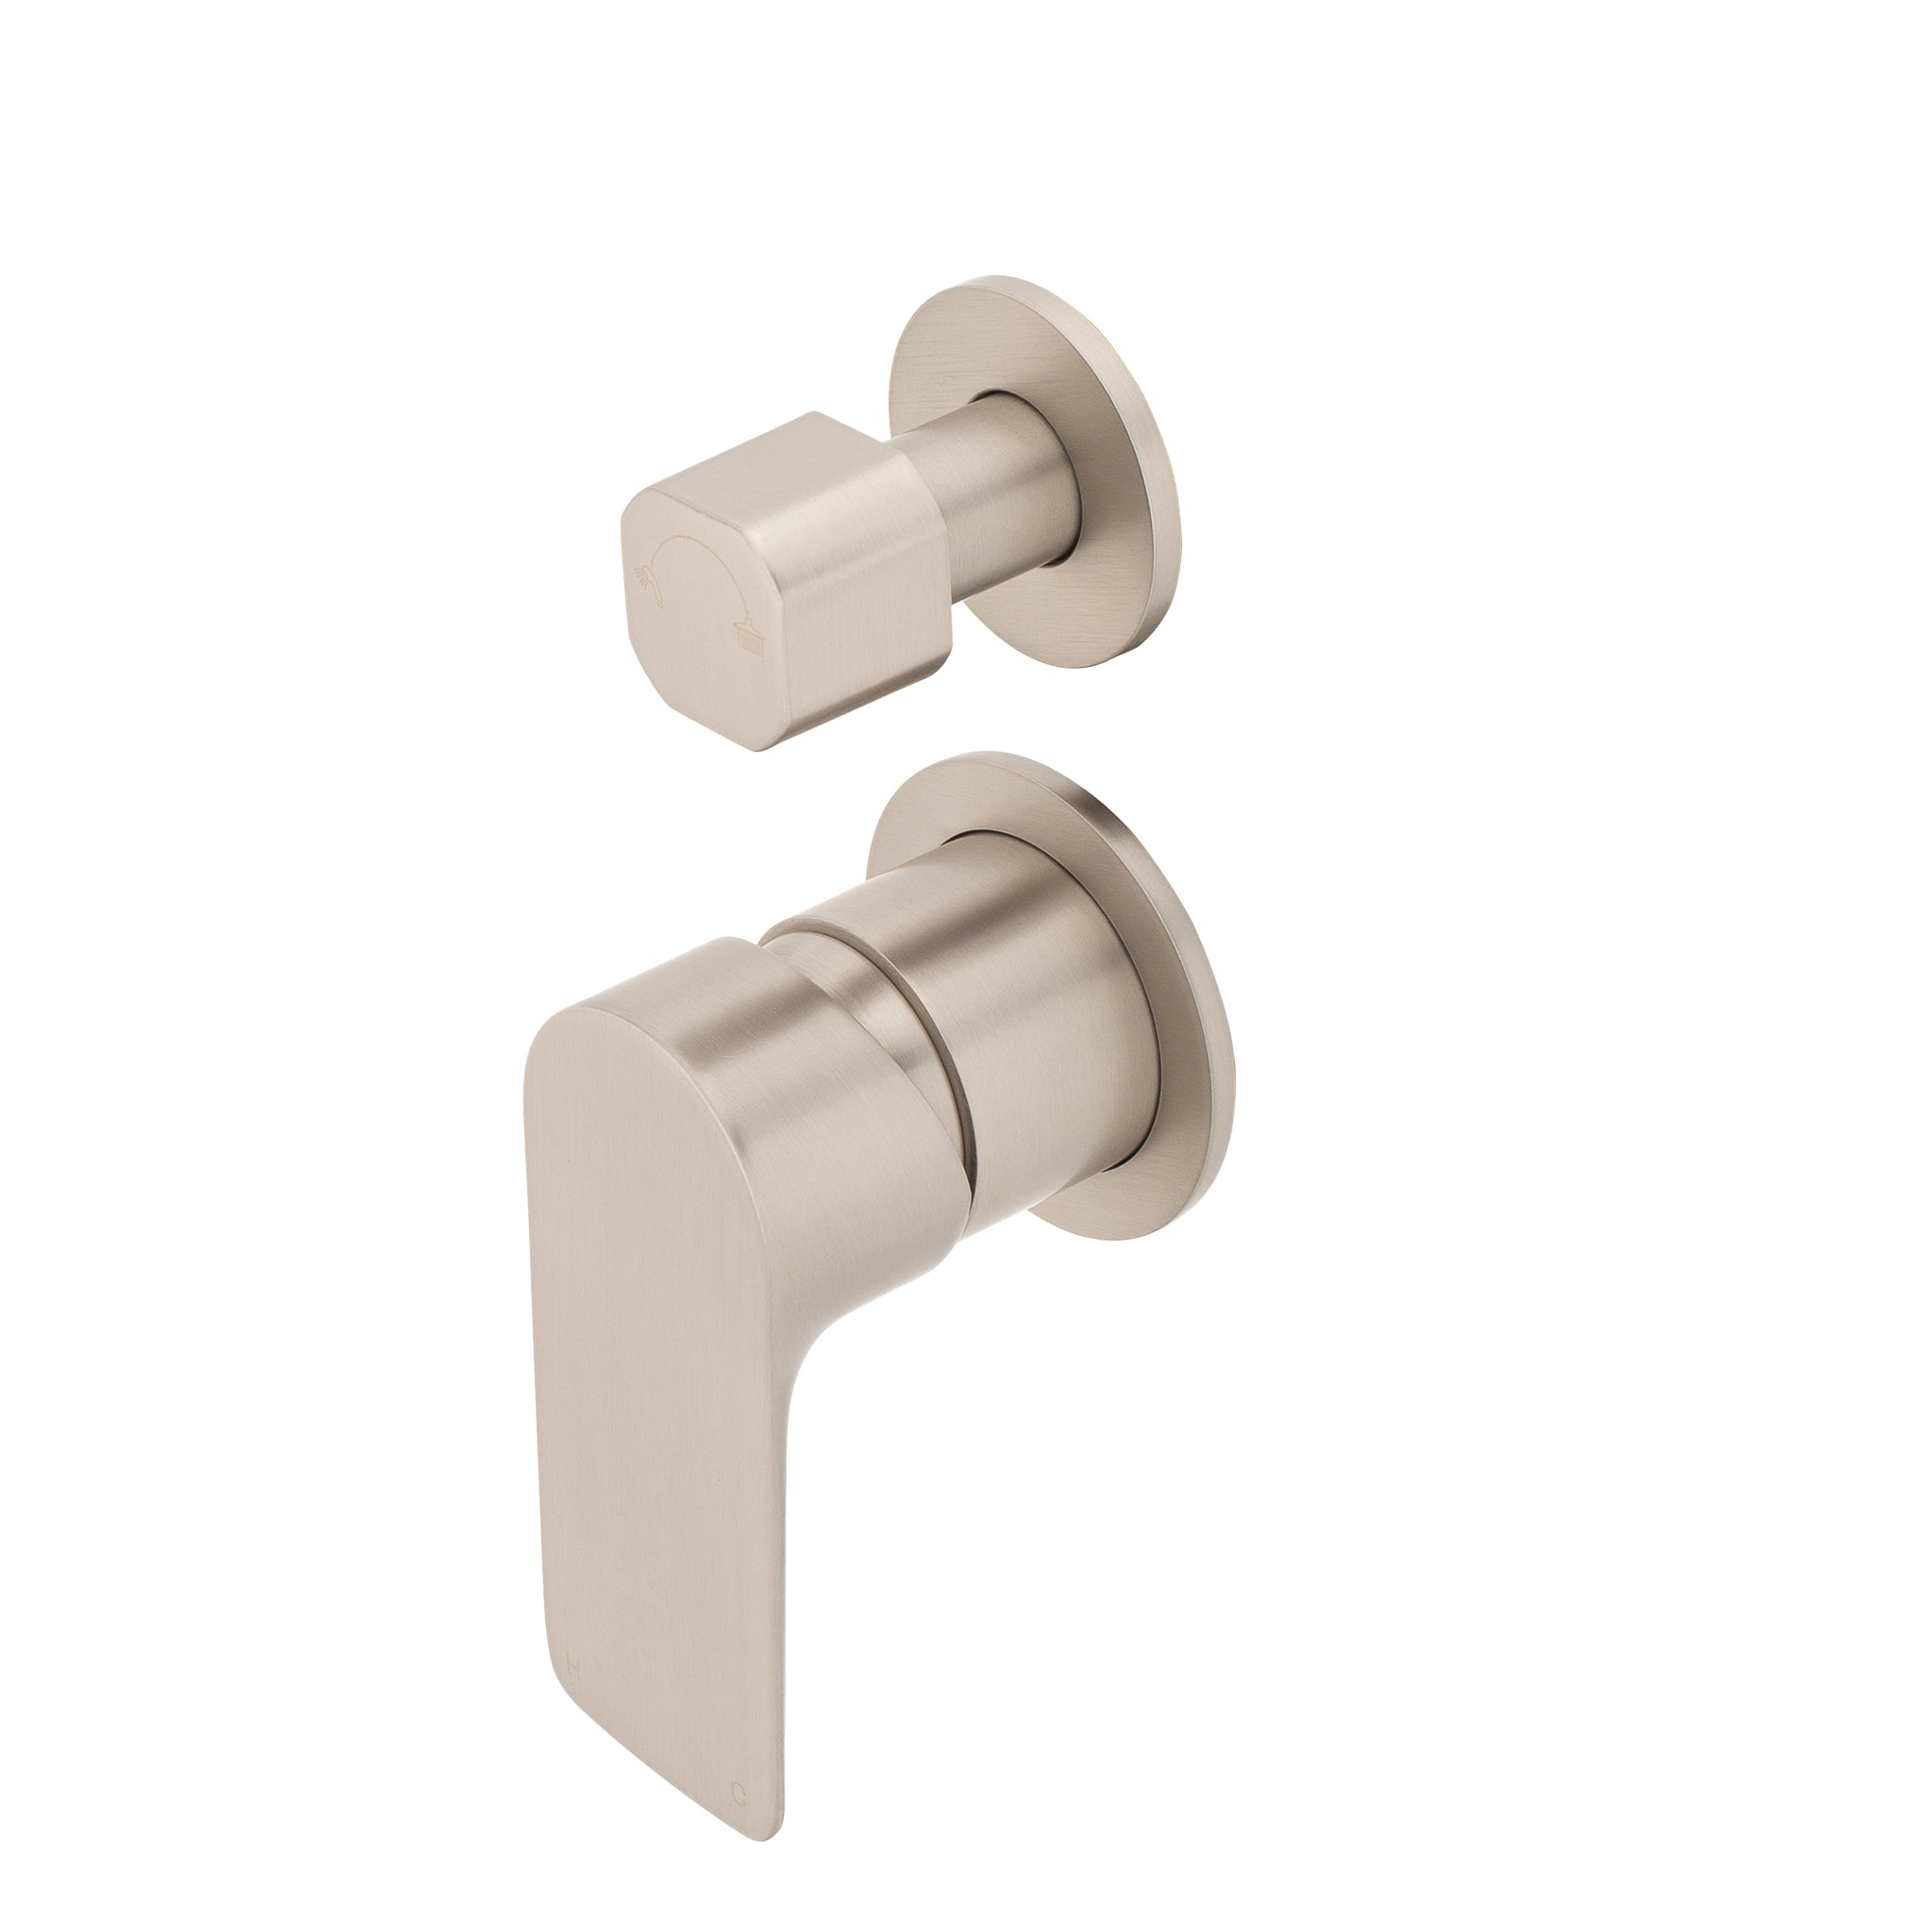 Jena Shower/ Bath Wall Mixer with Diverter and Round Plates, Brushed Nickel